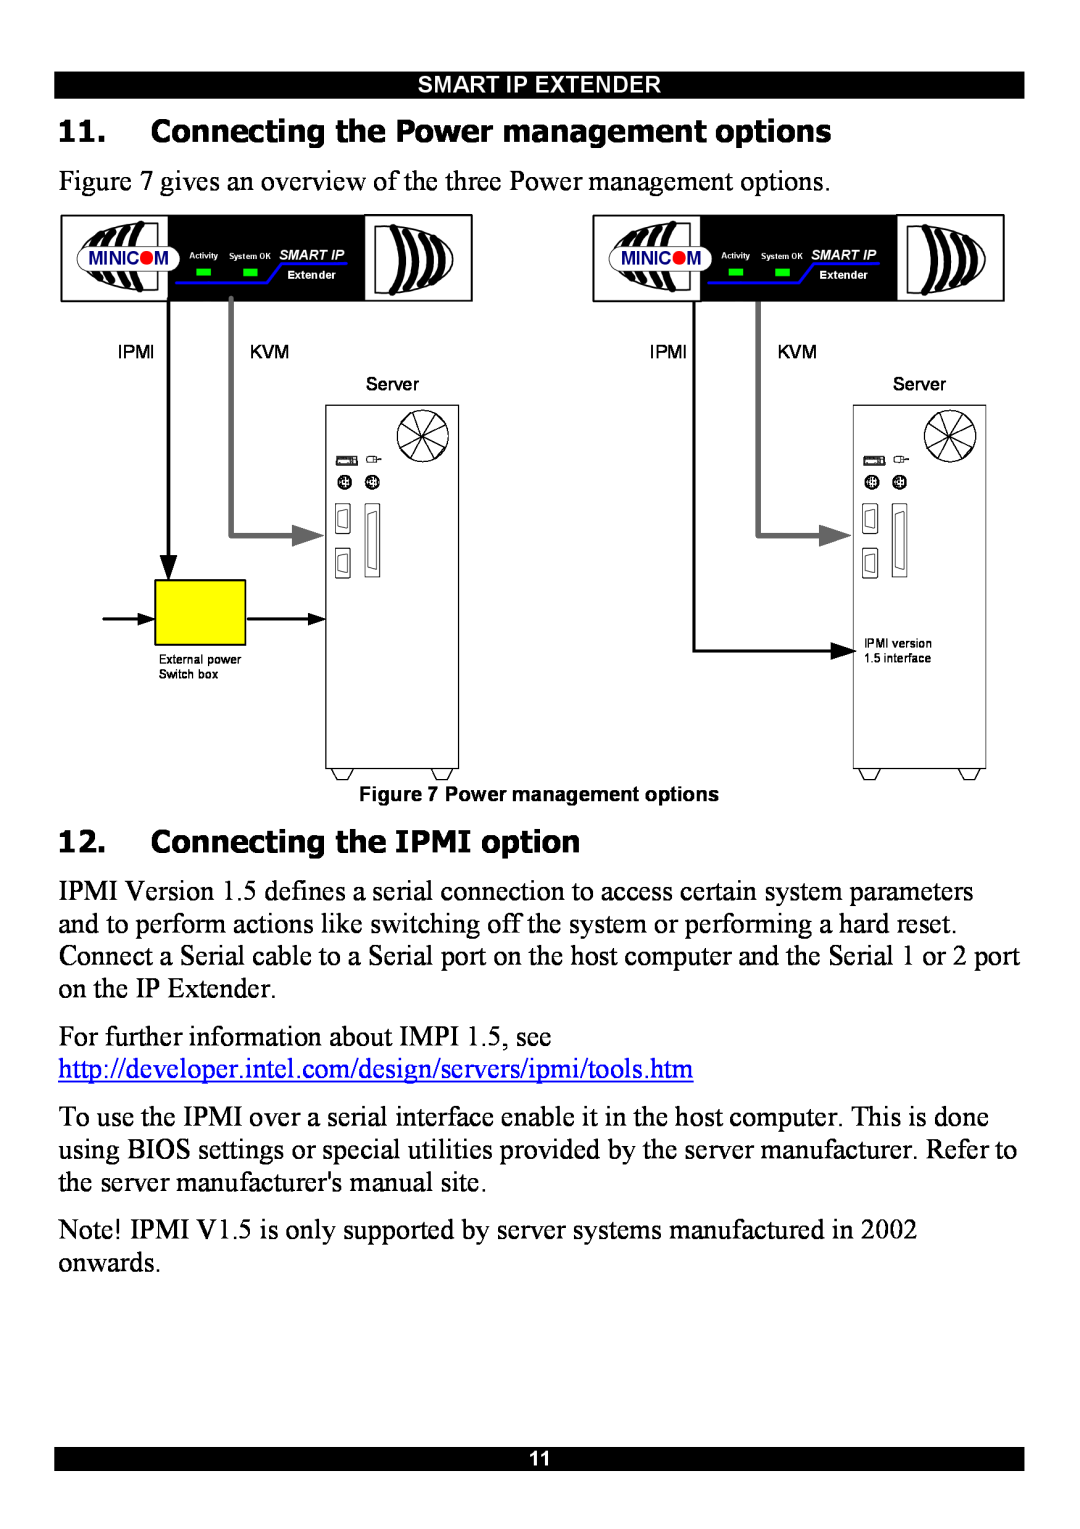 Minicom Advanced Systems Smart IP Extender manual Connecting the Power management options, Connecting the IPMI option 